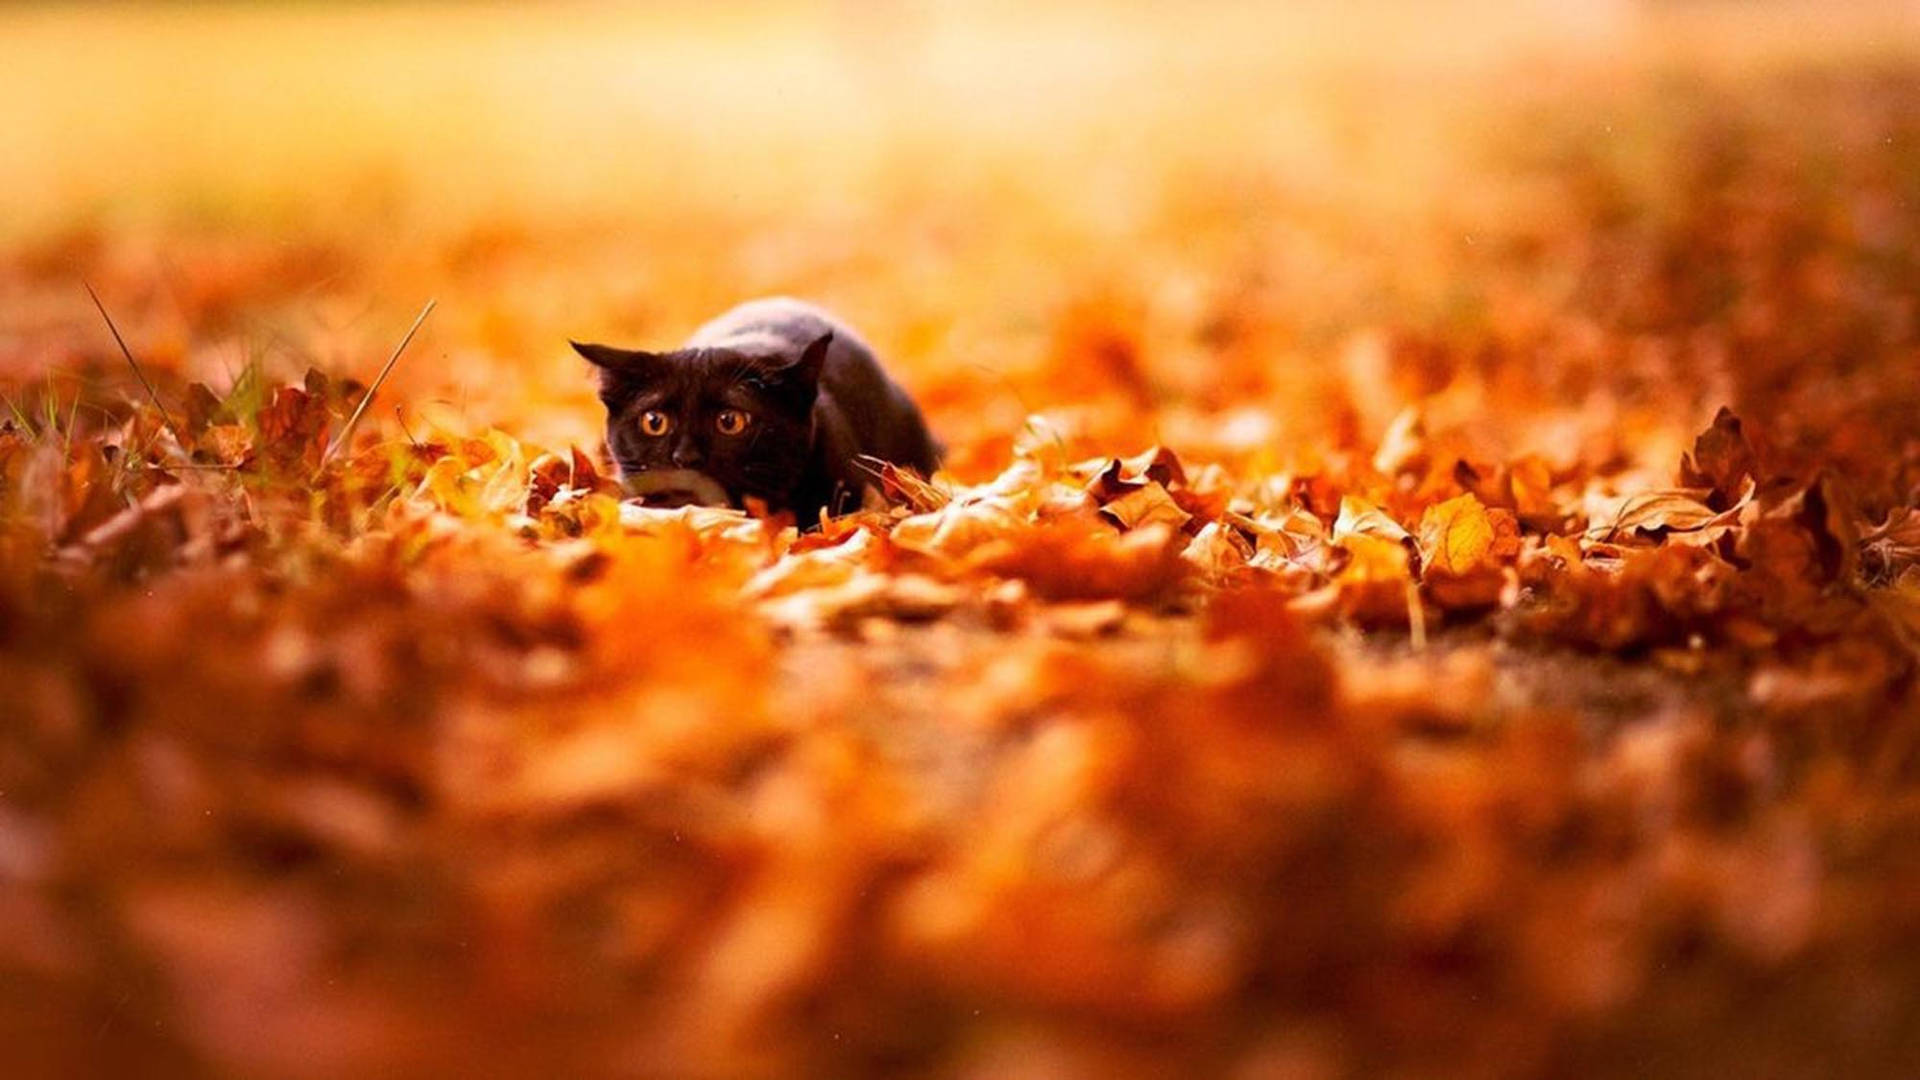 Fall Aesthetic Cat And Leaves Wallpaper